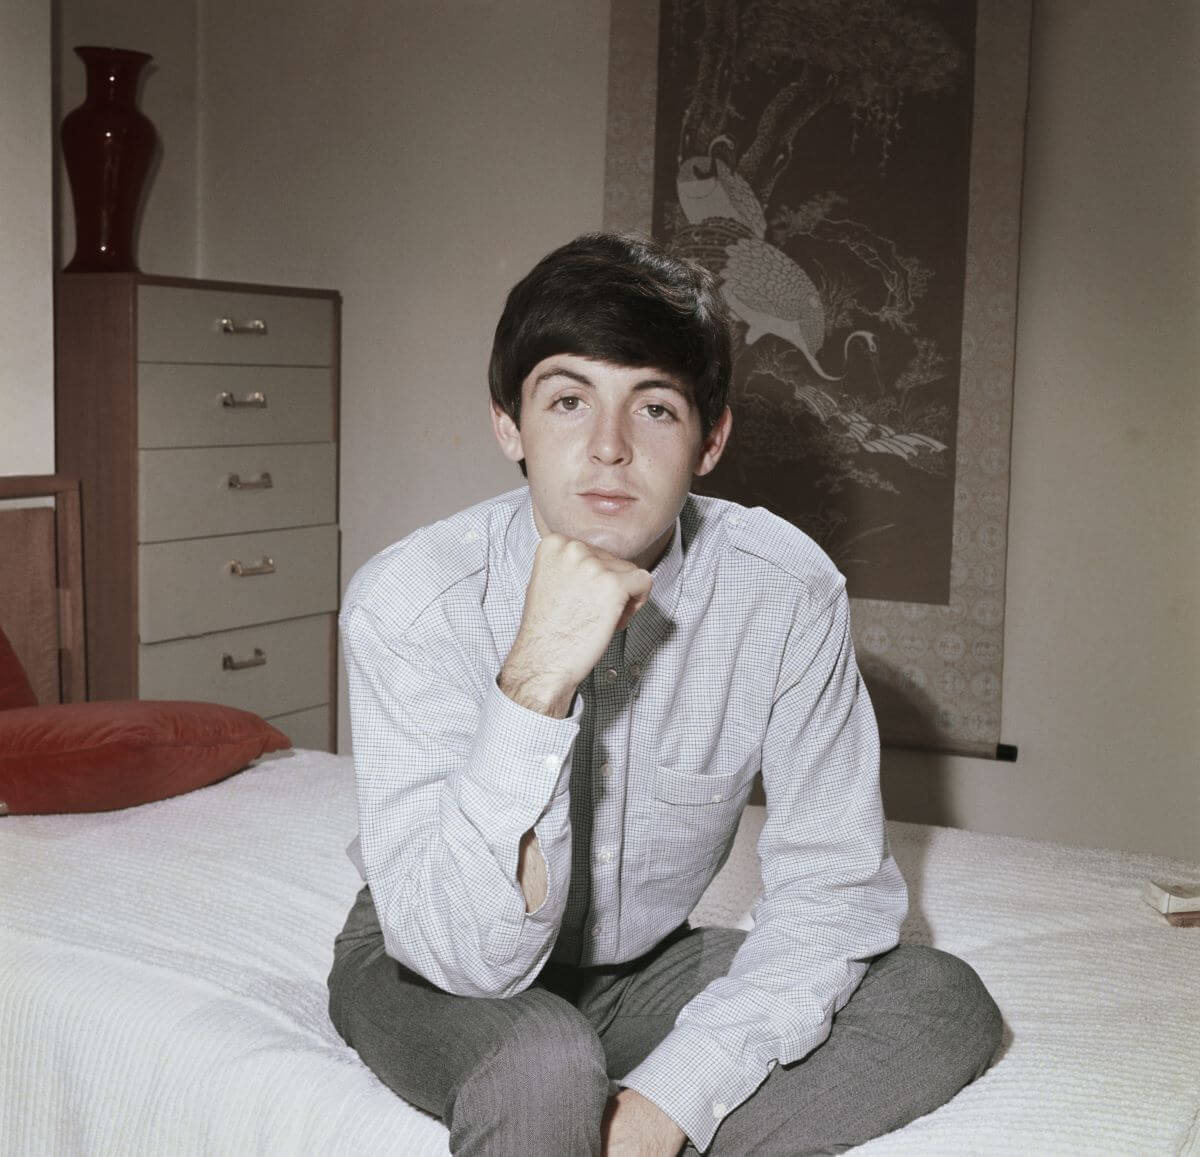 Paul McCartney sits on a bed. He rests his chin on his fist and his elbow on his thigh.